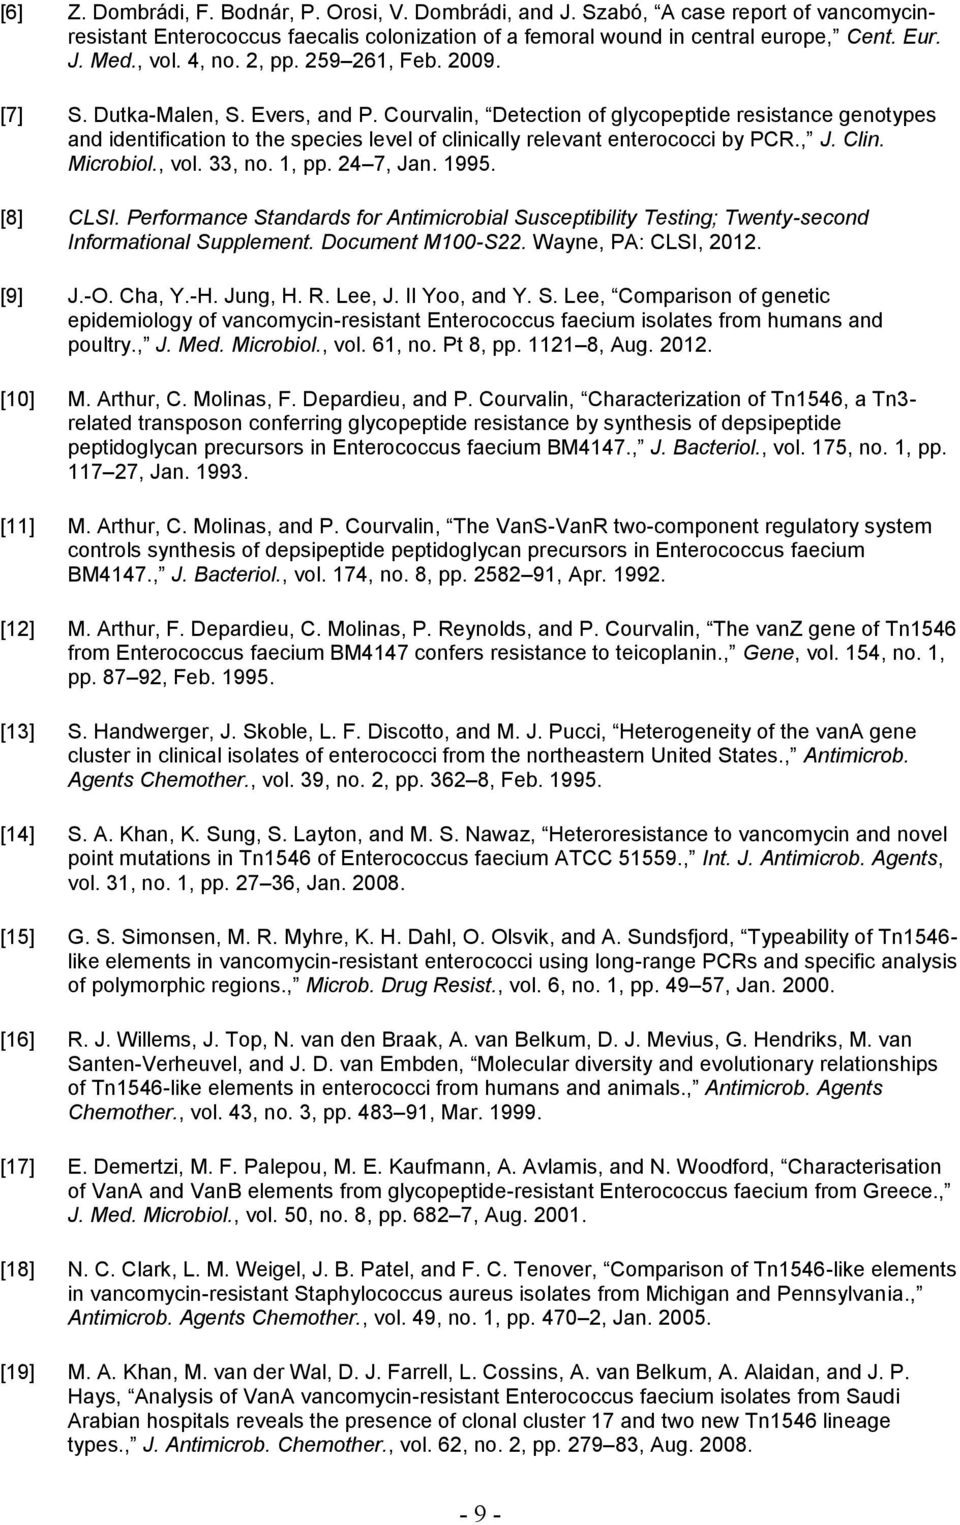 Courvalin, Detection of glycopeptide resistance genotypes and identification to the species level of clinically relevant enterococci by PCR., J. Clin. Microbiol., vol. 33, no. 1, pp. 4 7, Jan. 1995.